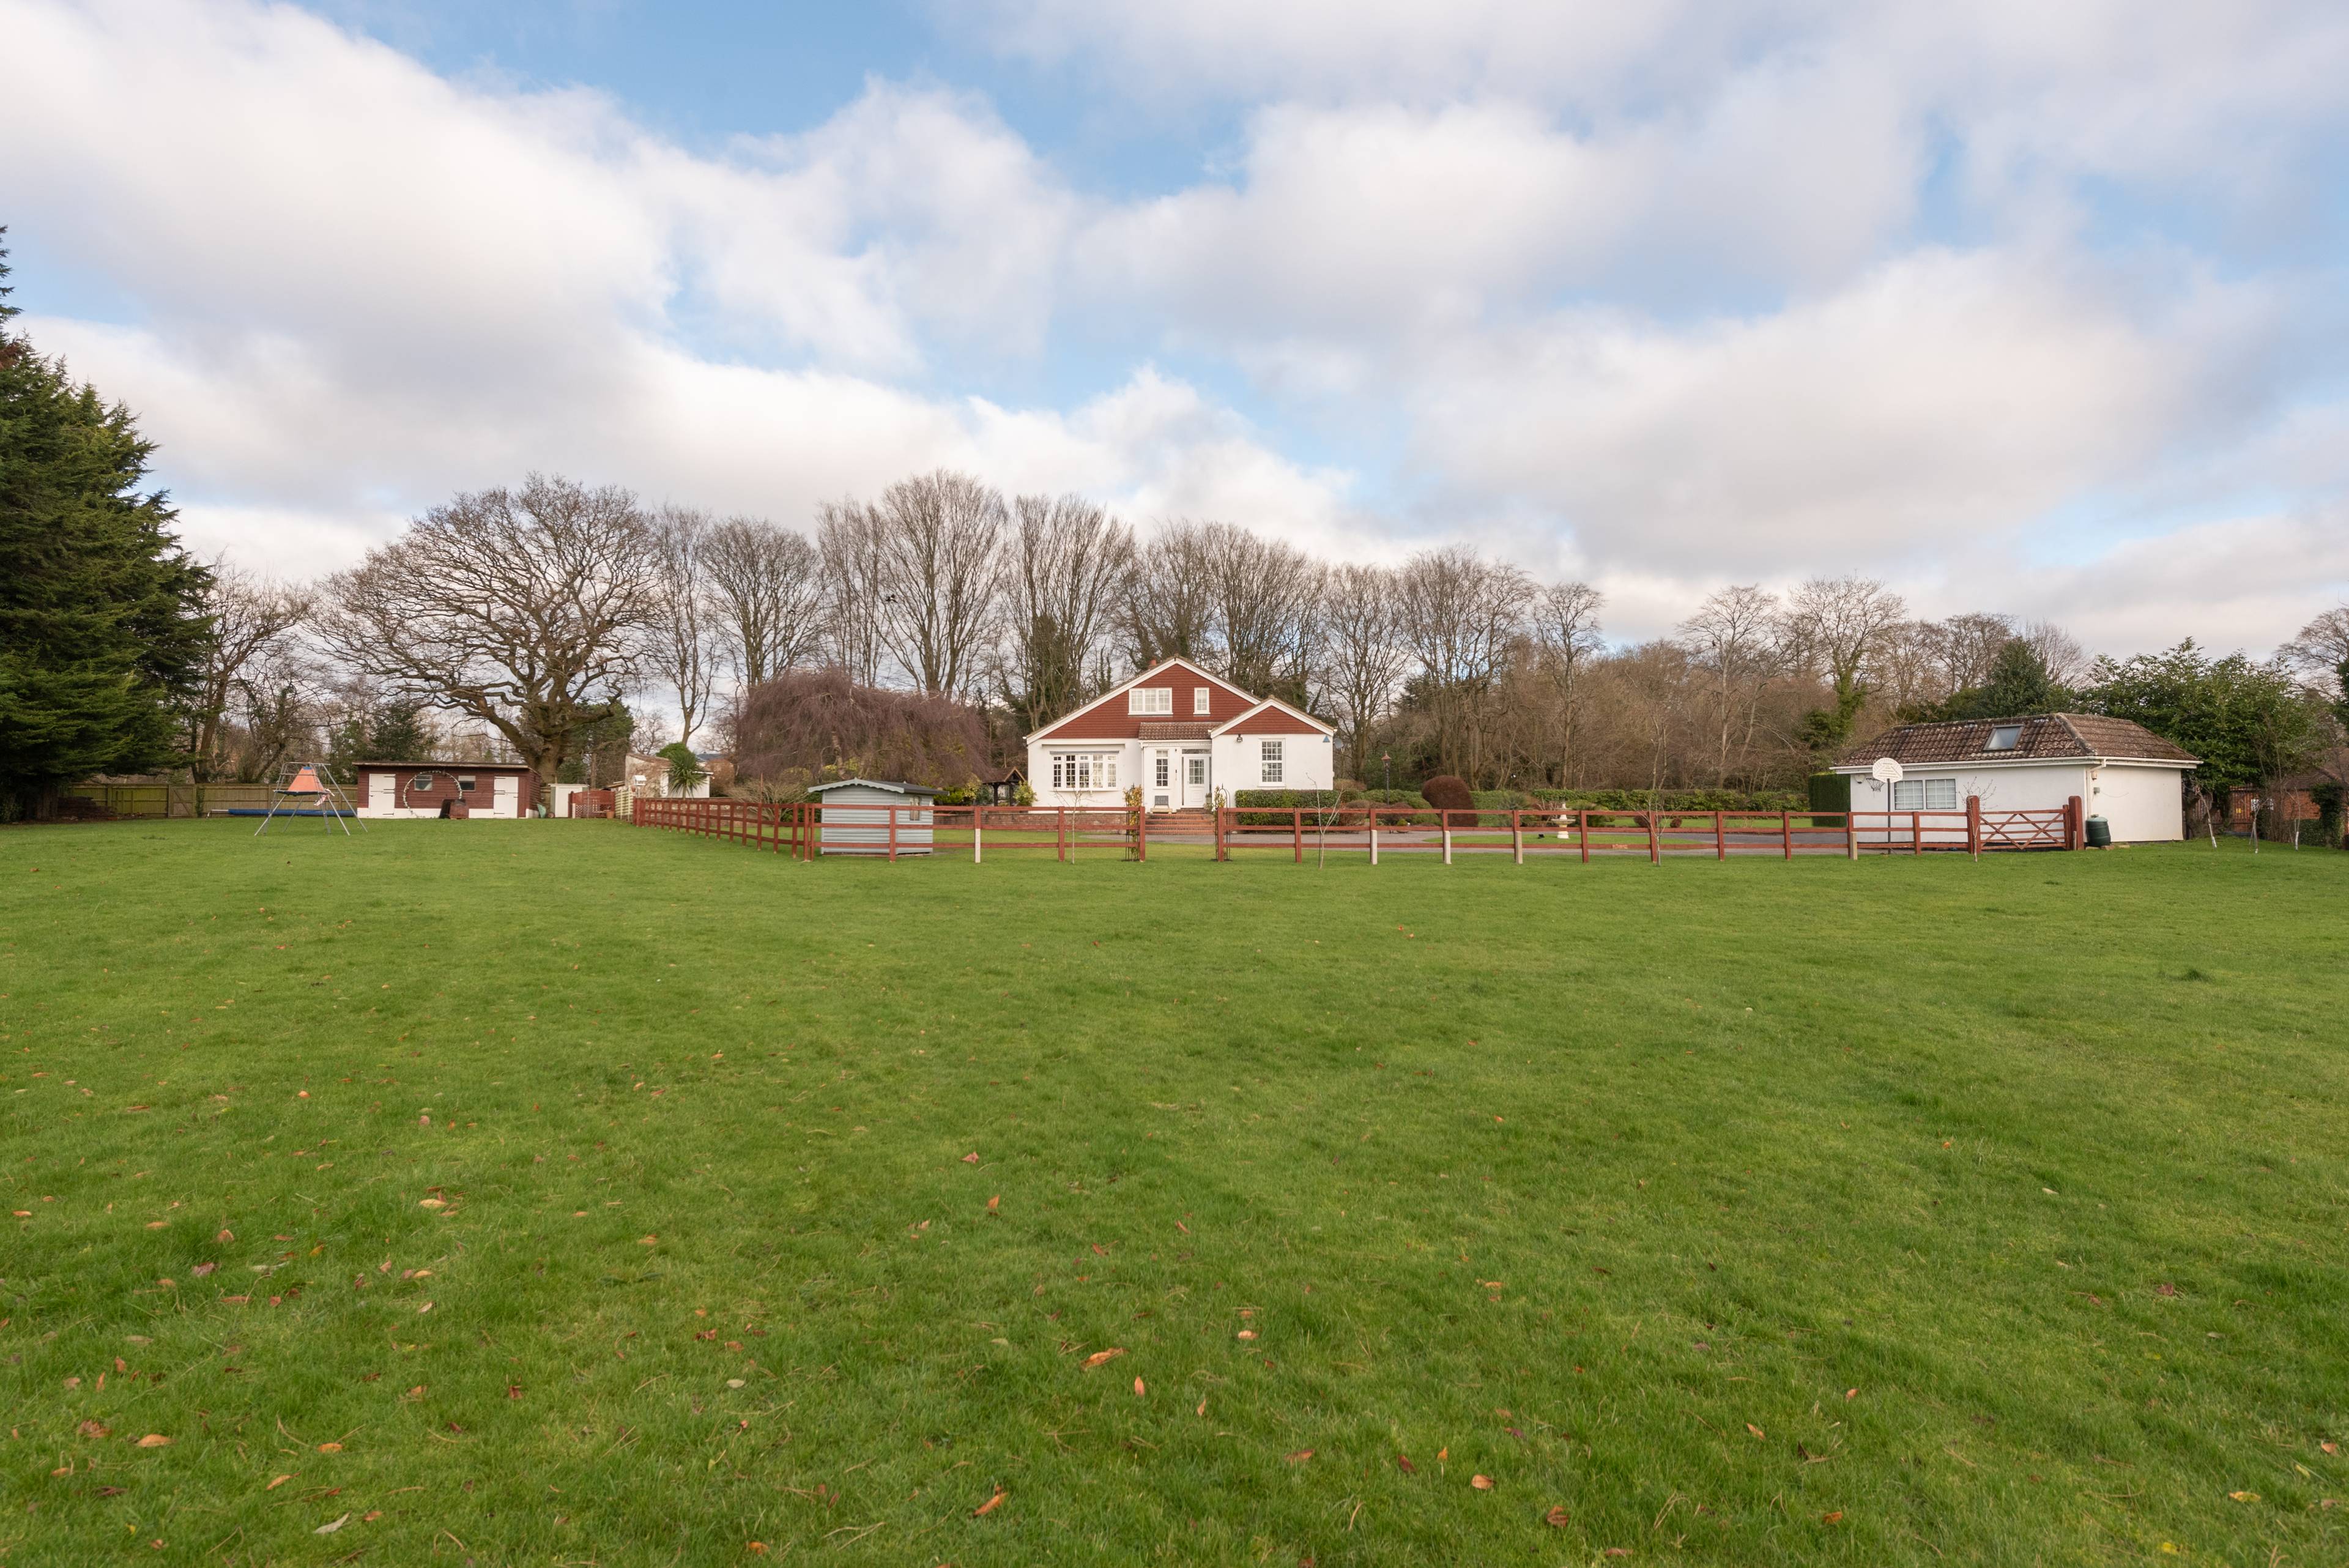 Spacious 6 bedroom family home with swimming pool, paddock and stables set in the idyllic village of Penn, Buckinghamshire. A beautiful home rich with royal connections.